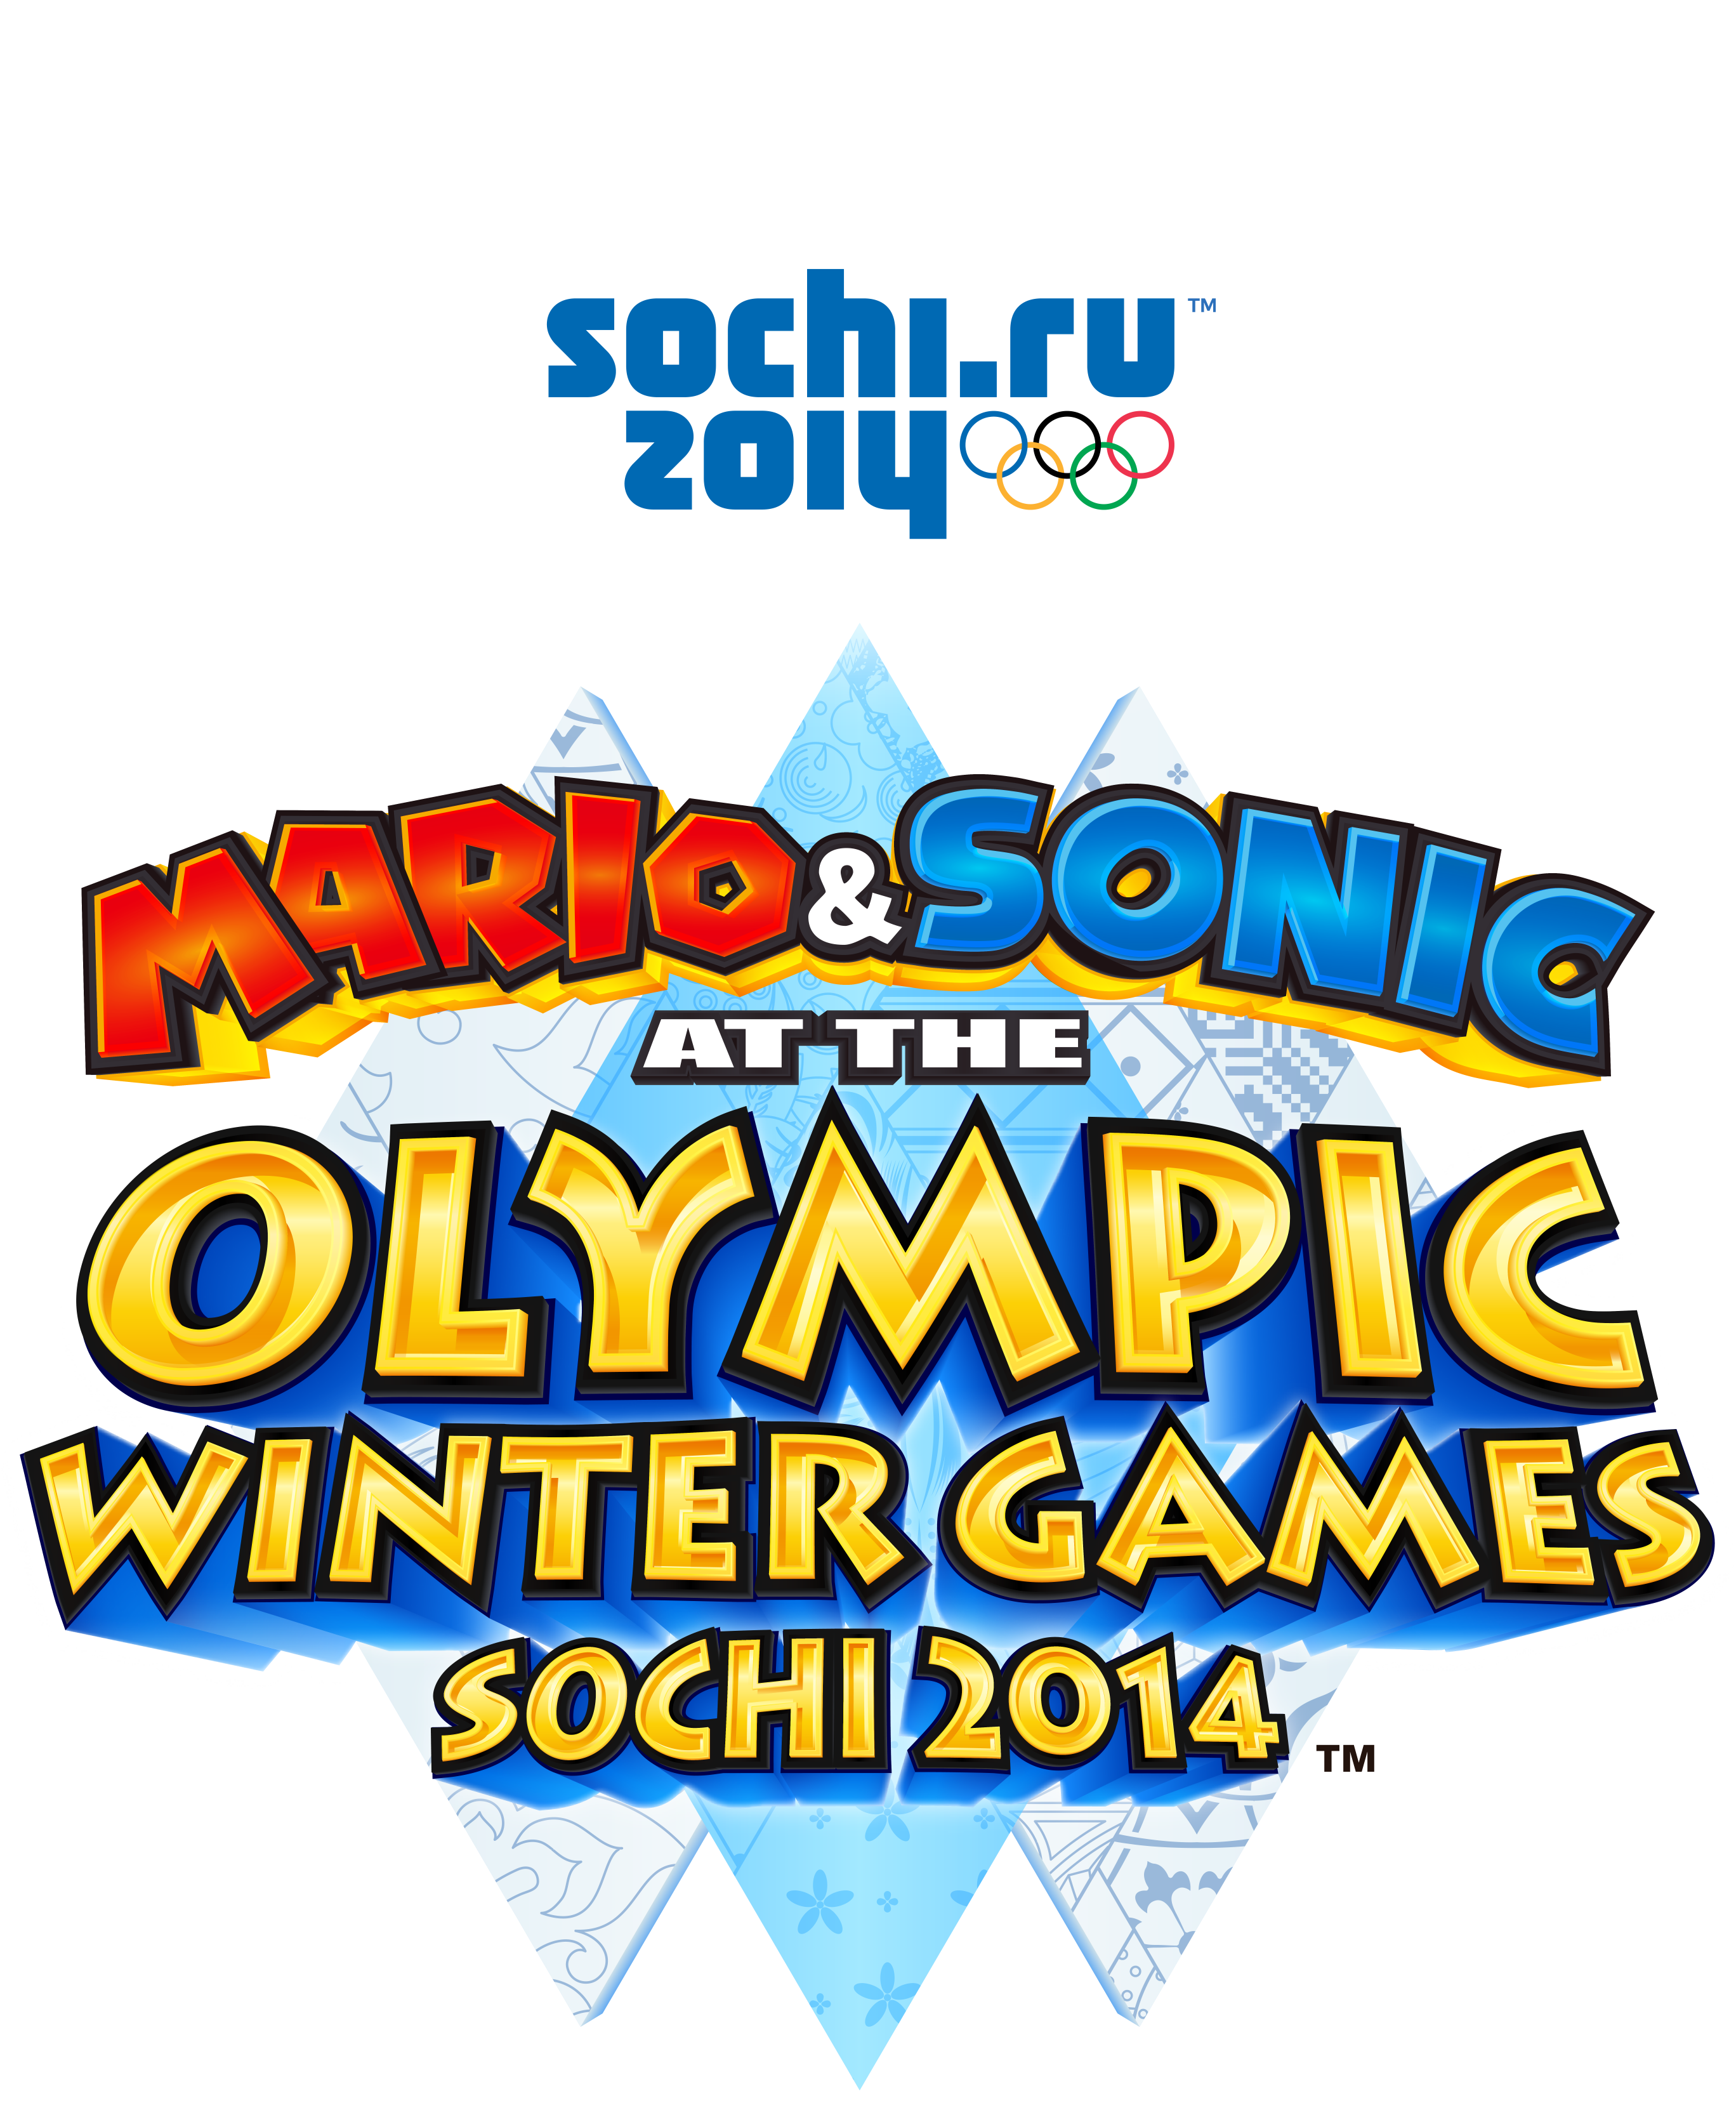 A Practical Rundown of Every Winter Olympic Event | Sports Blog Movement